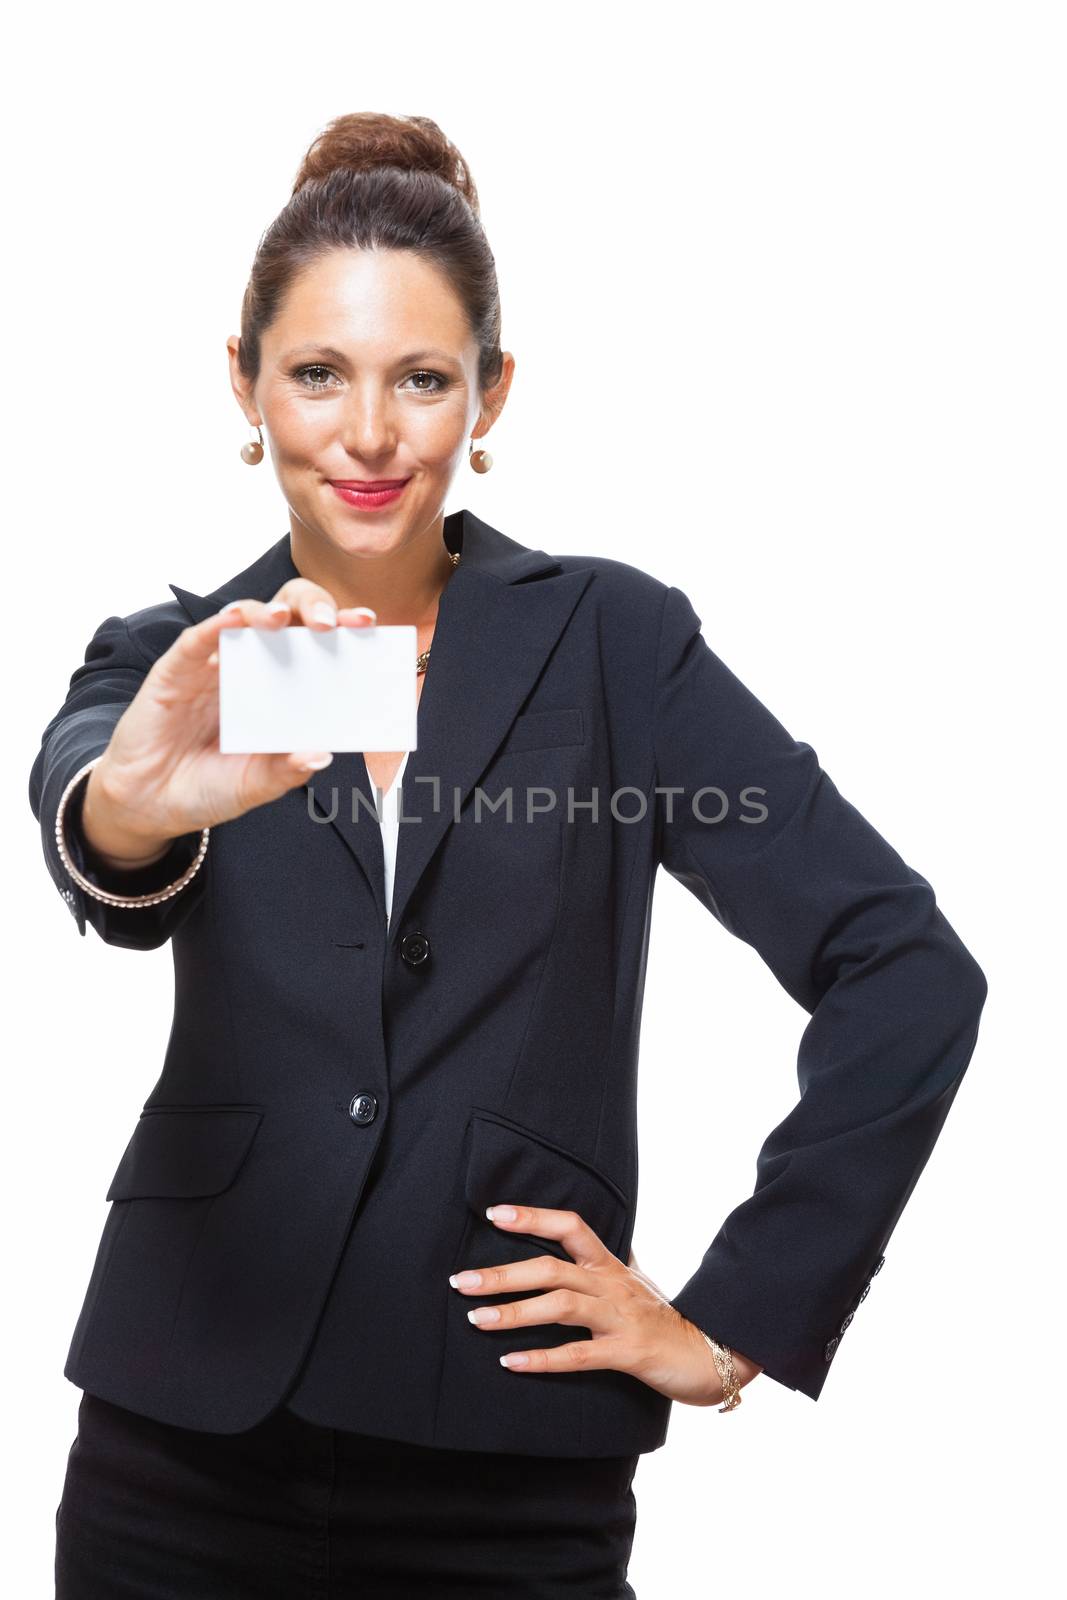 Portrait of a Happy Businesswoman Holding Small White Card with Copy Space, Isolated on White Background.